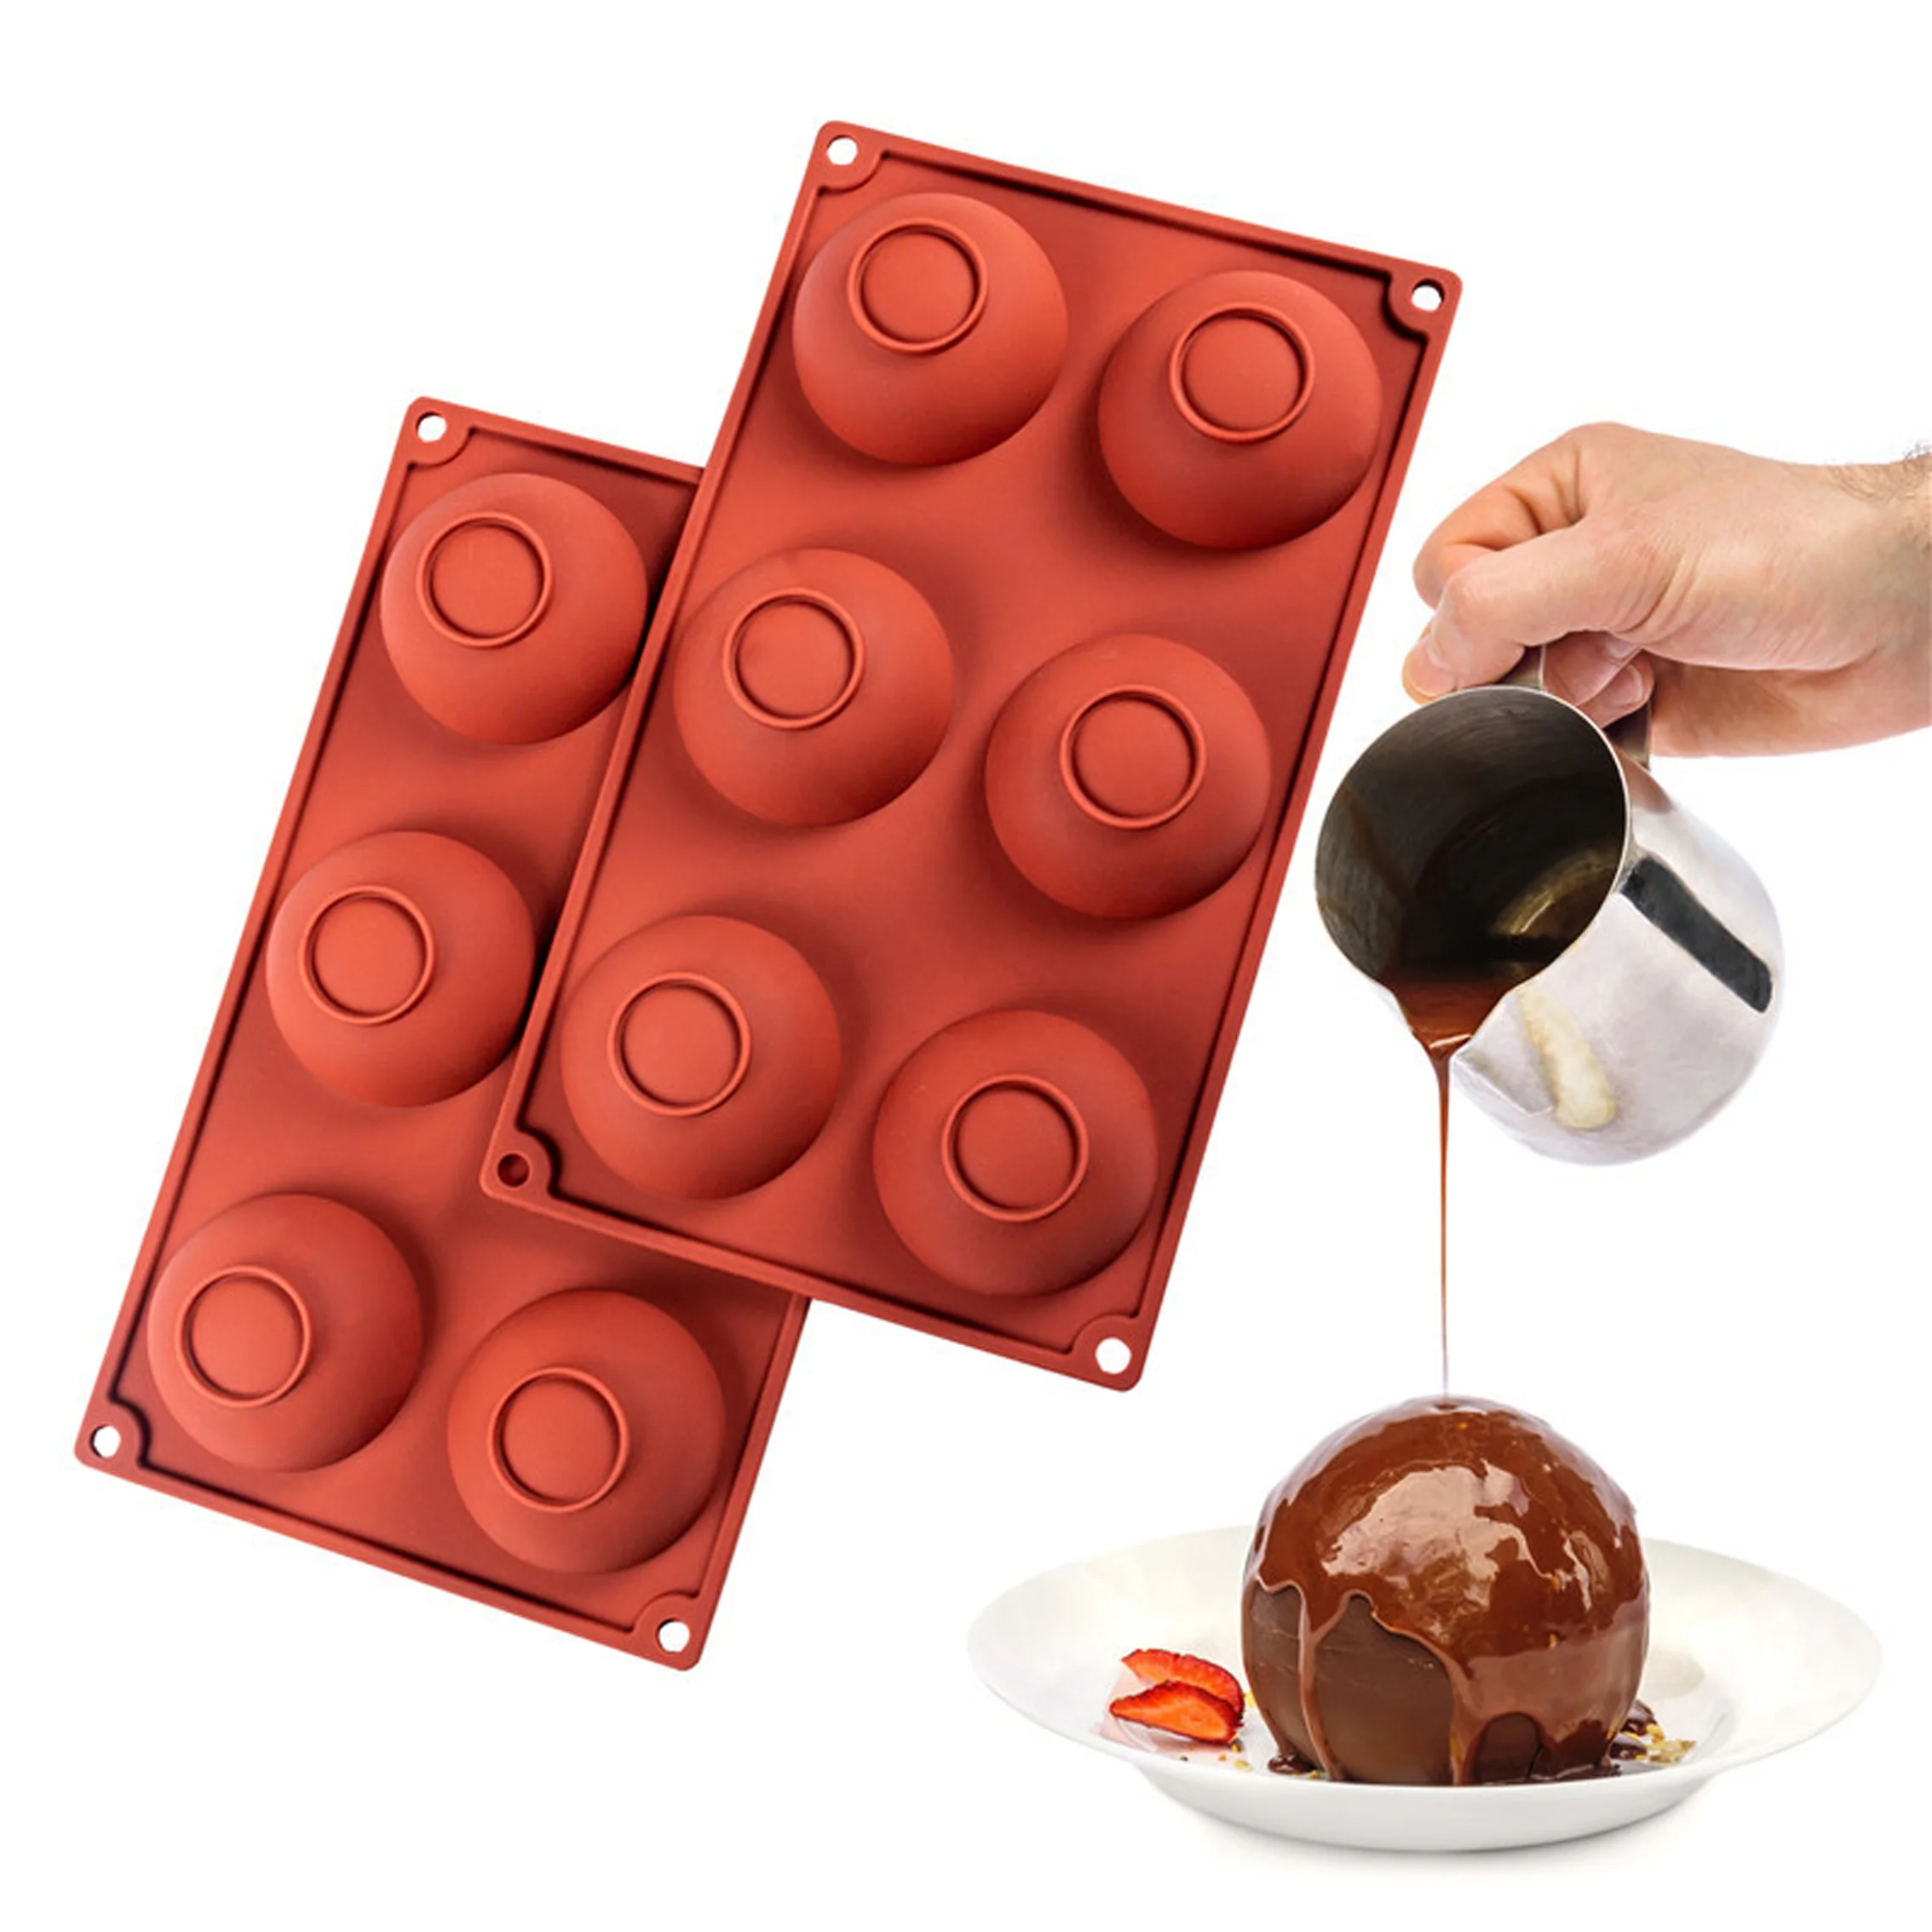 3D Hemisphere Shape Chocolate Mold 6 8 15 24 Cavity New Semicircle Diy Silicone Cake Mold Flower Cake Tools soap mould making